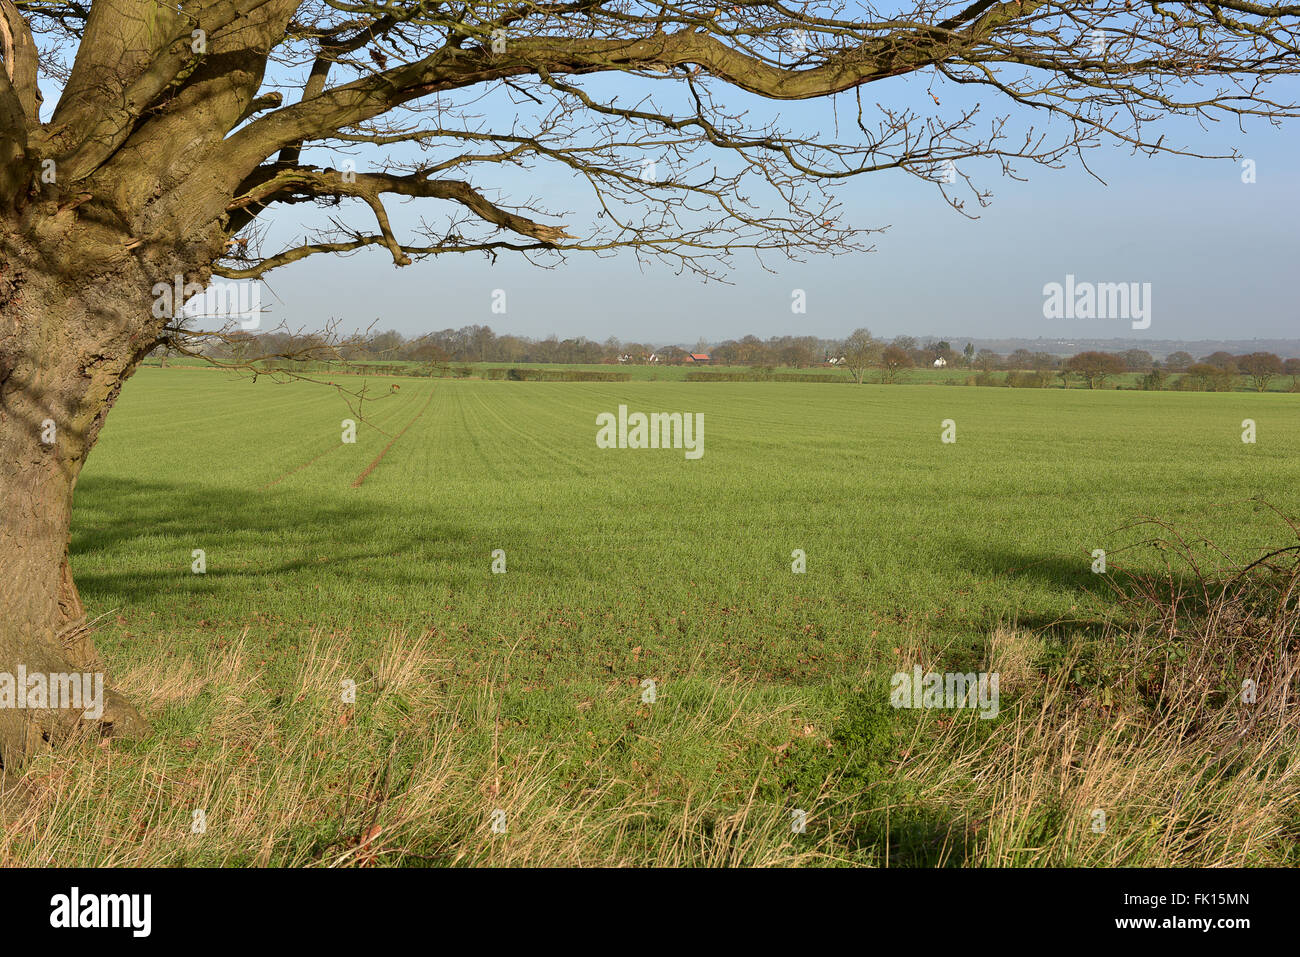 winter scene of Essex countryside with field of winter wheat framed by large old English oak tree Stock Photo